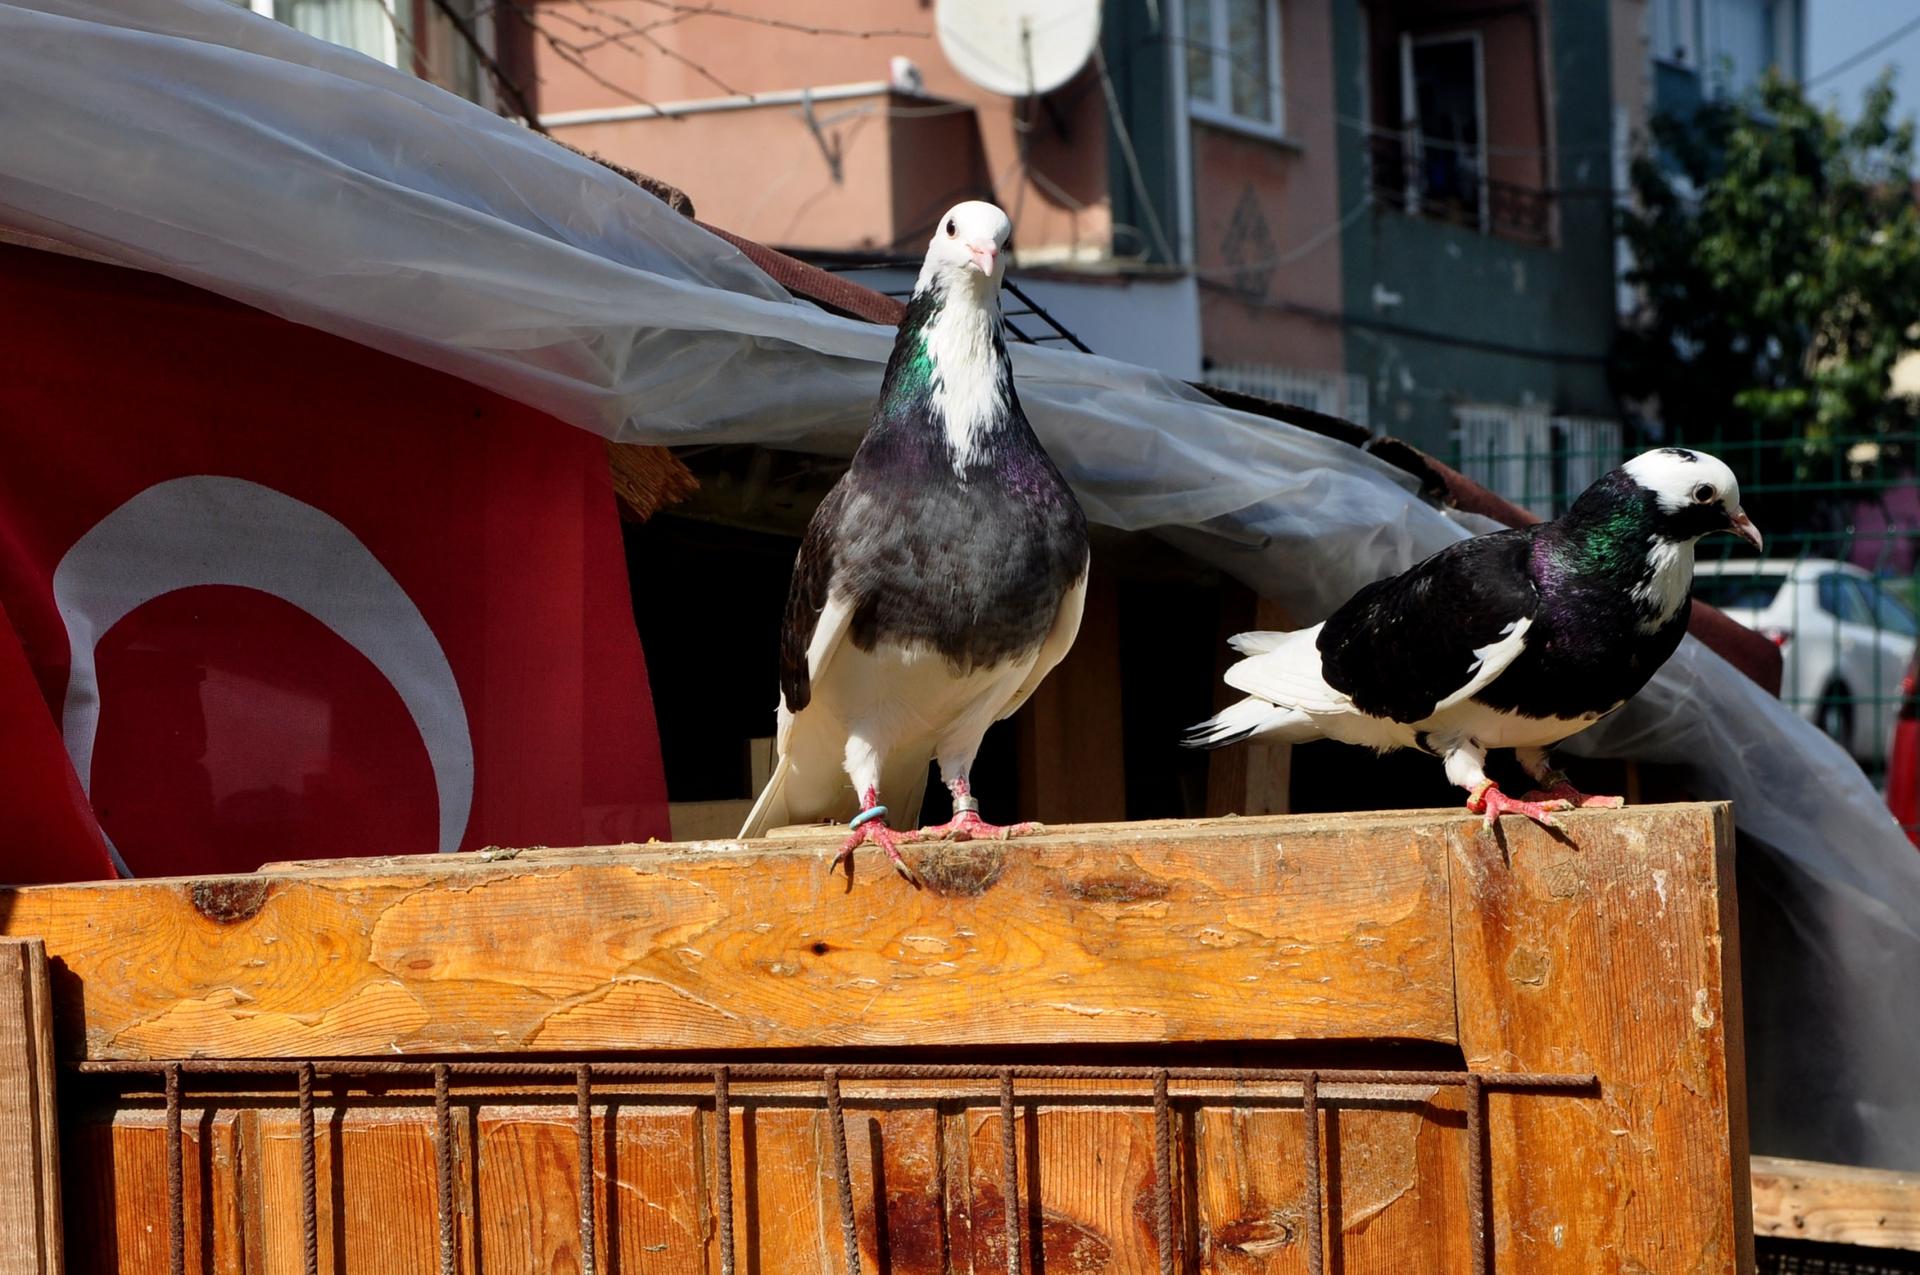 After lunch, a pair of Yalcın Karcı’s pigeons sit and observe the visitors. 